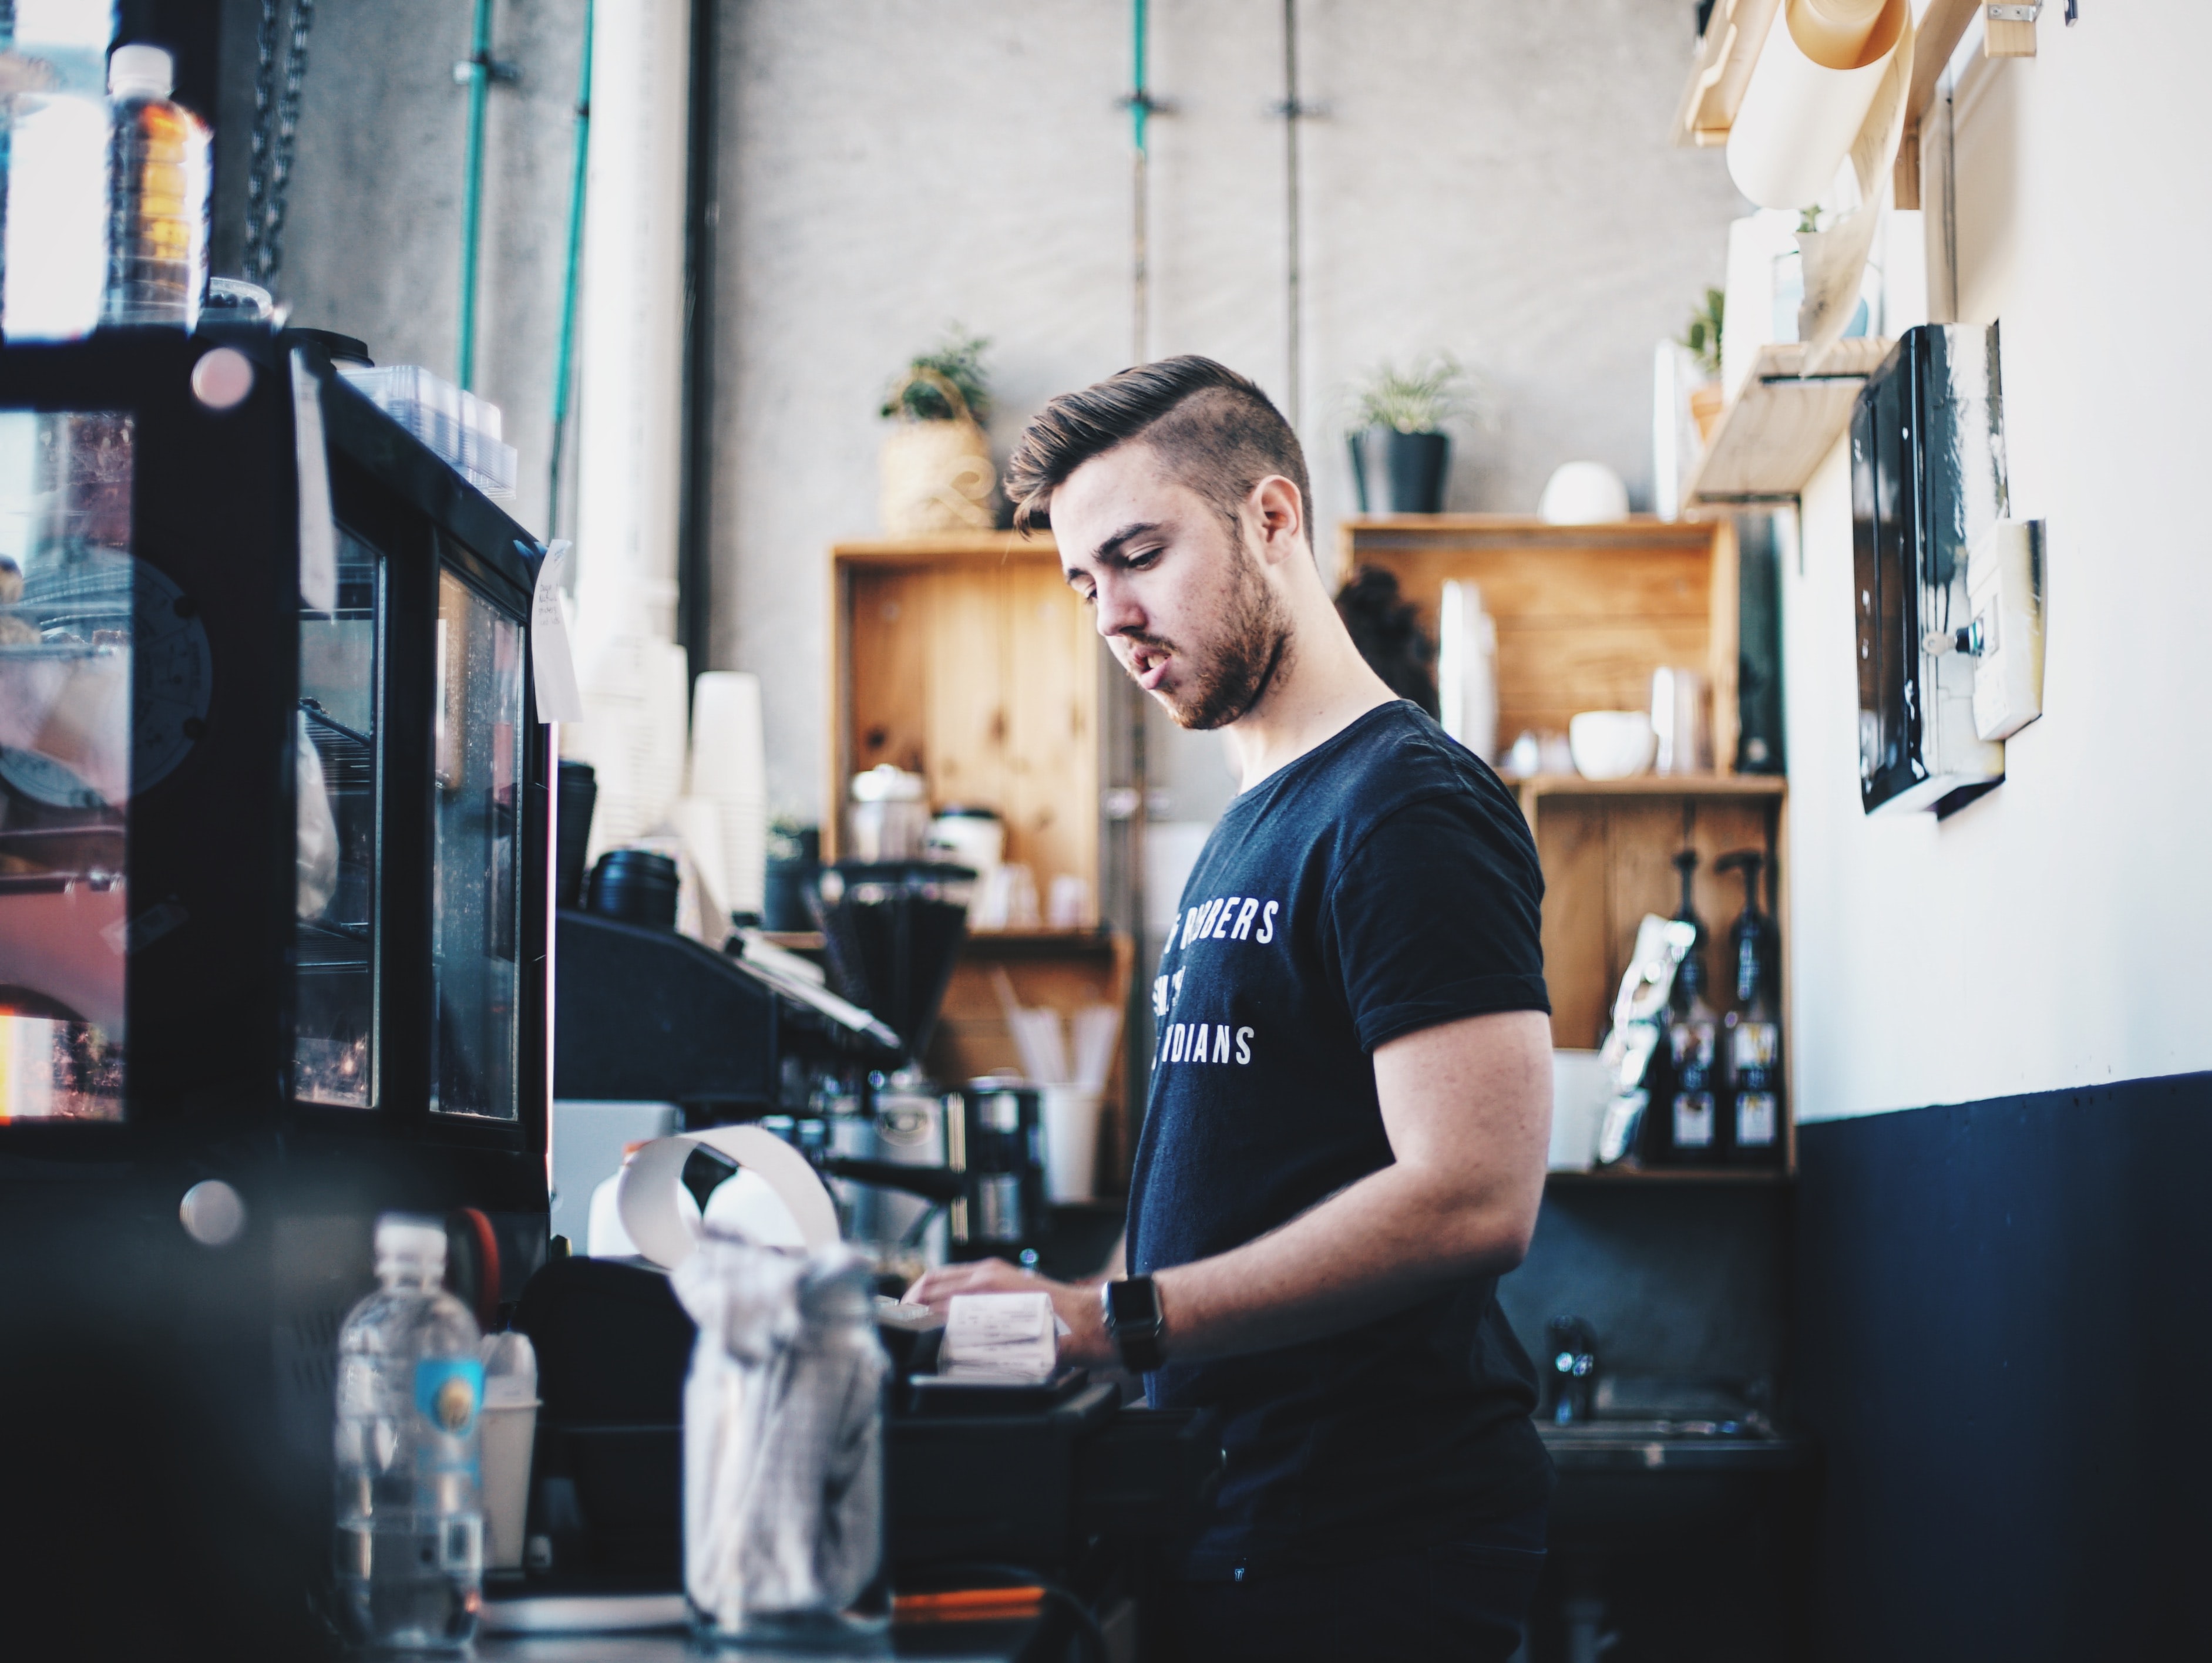 Self-employed? Don’t leave your business at risk.